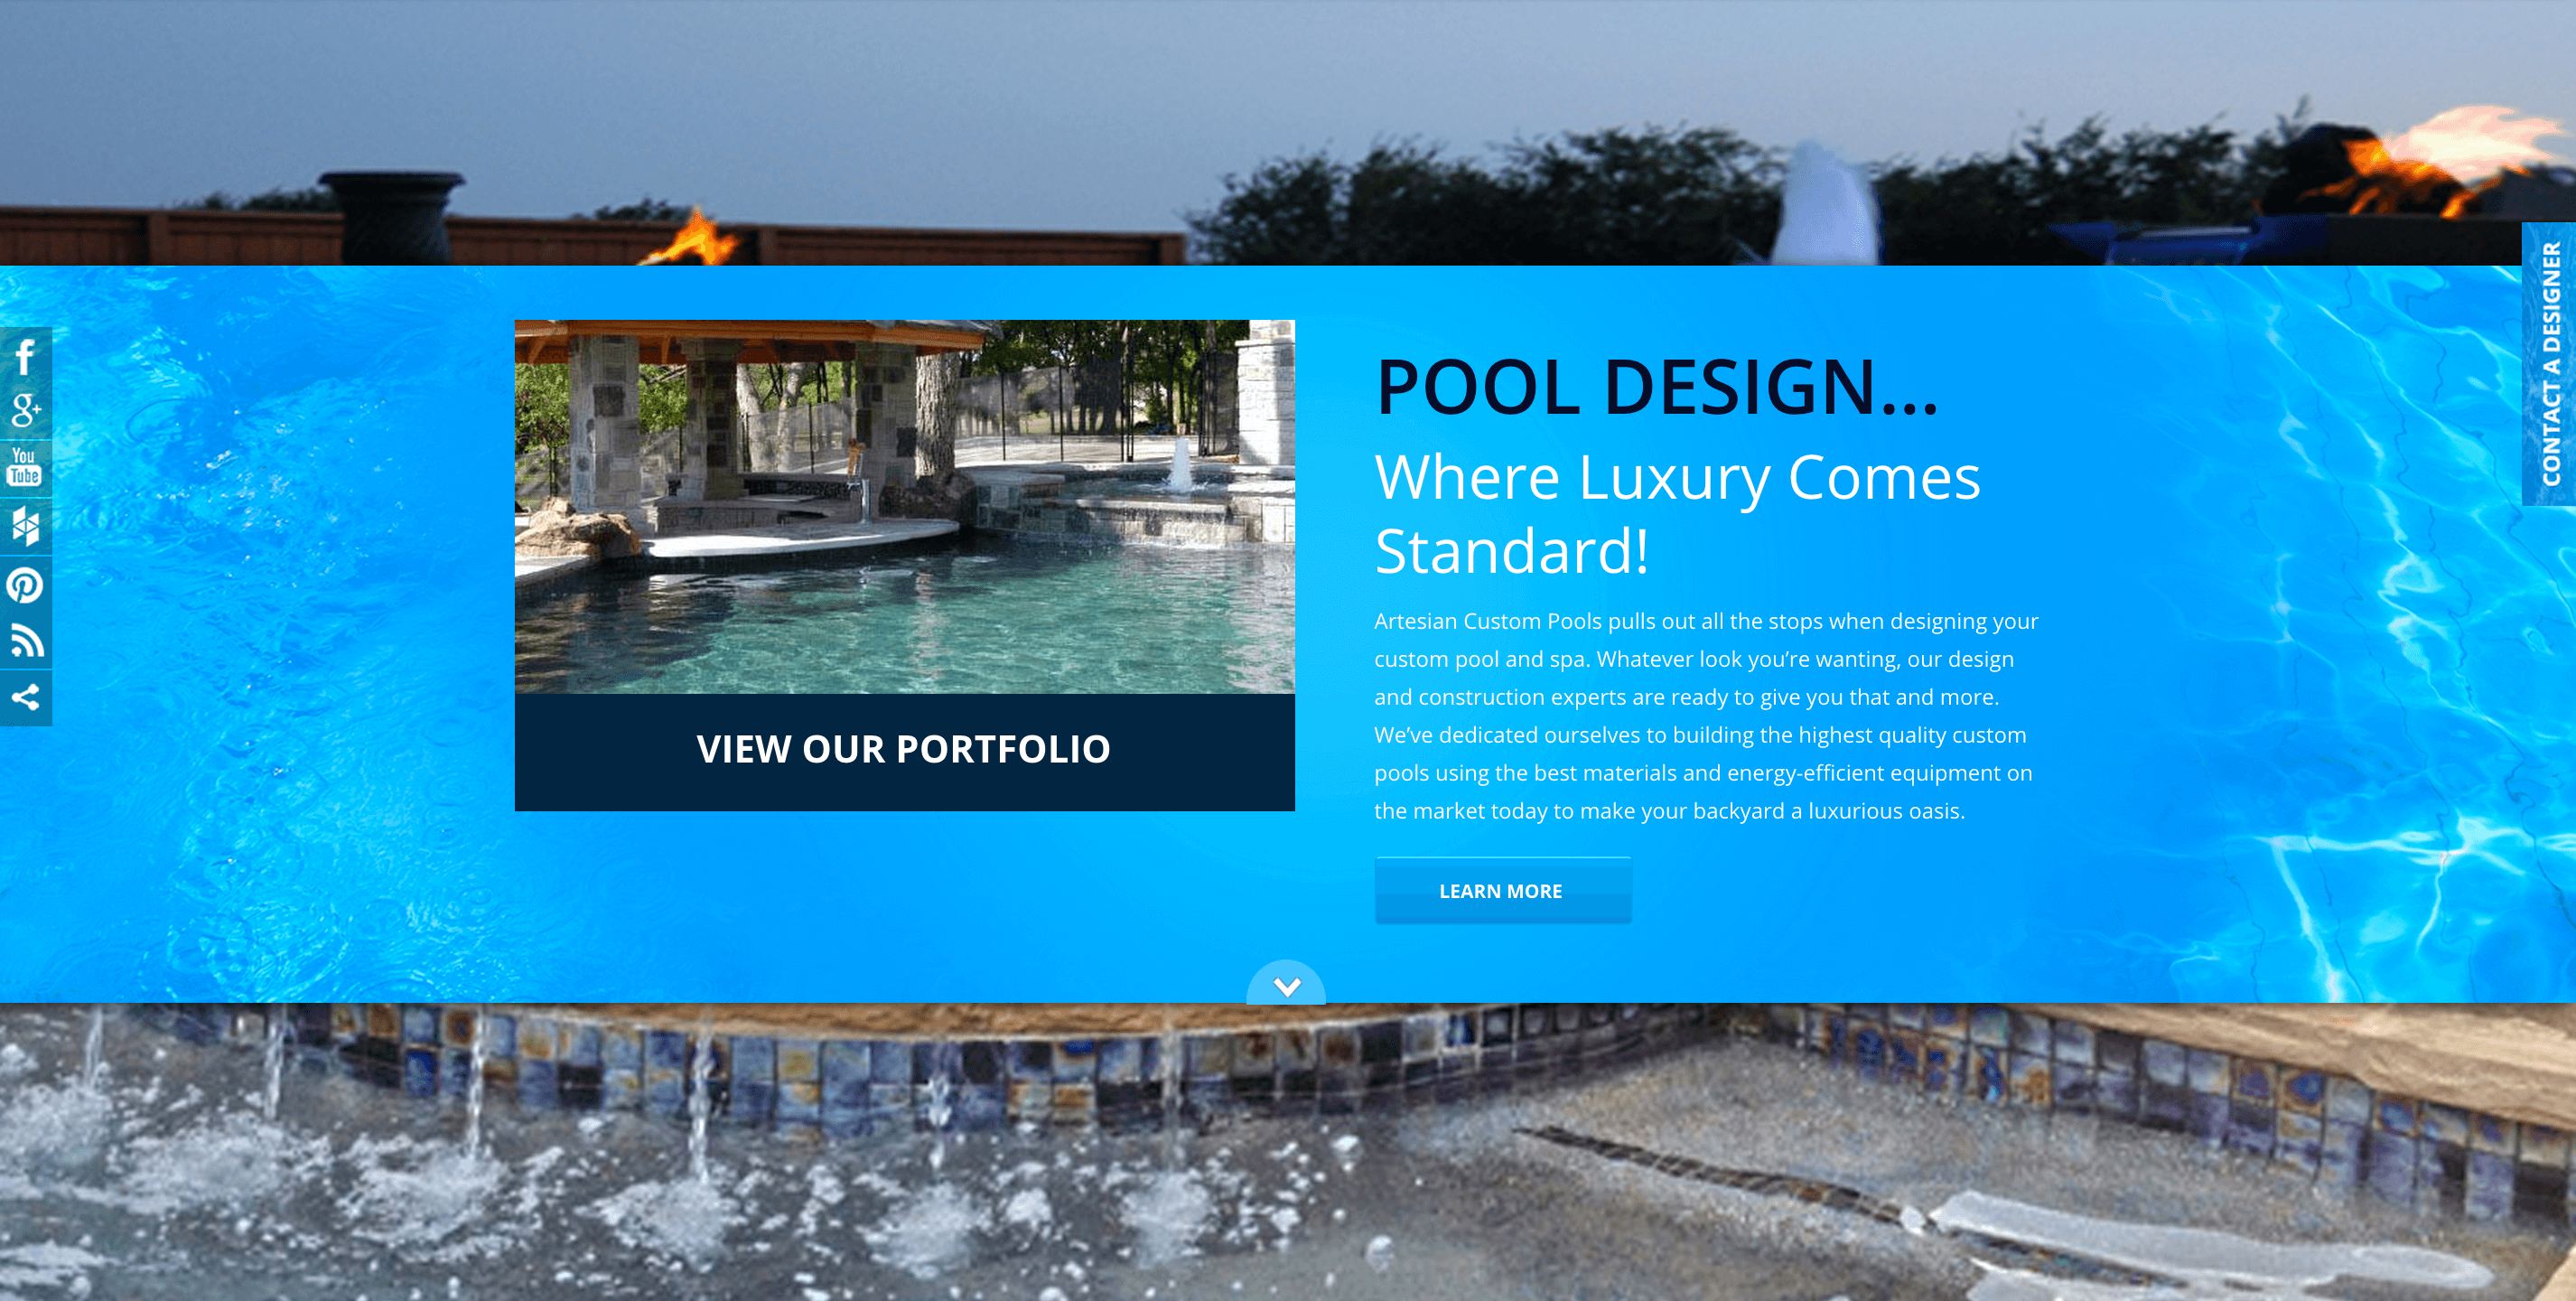 Client Profile: Artesian Custom Pools | Small Screen Producer Digital and Inbound Marketing Agency Houston